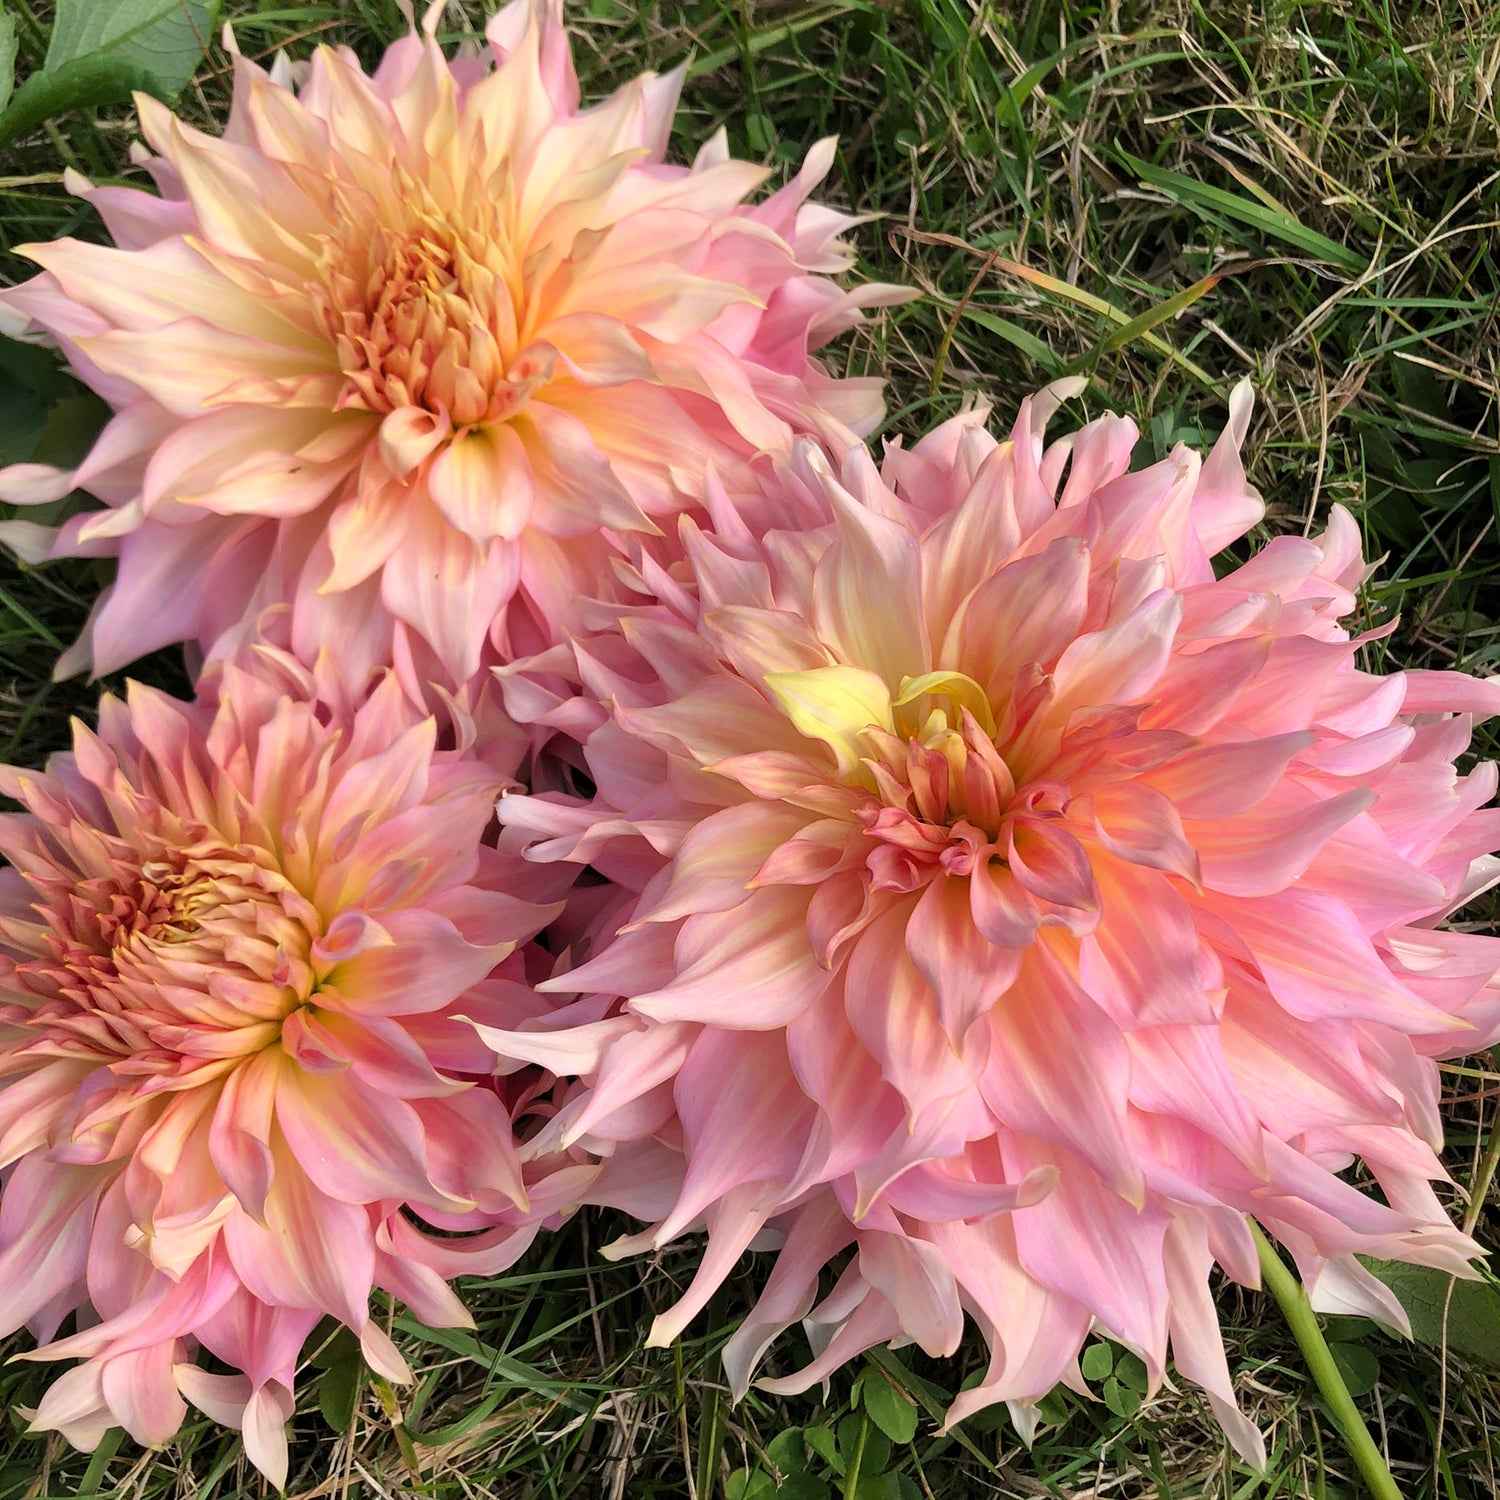 Shop Dinnerplate Dahlias. Featured: AC Paint, a ruffled dinnerplate, white with purple splotches and stripes